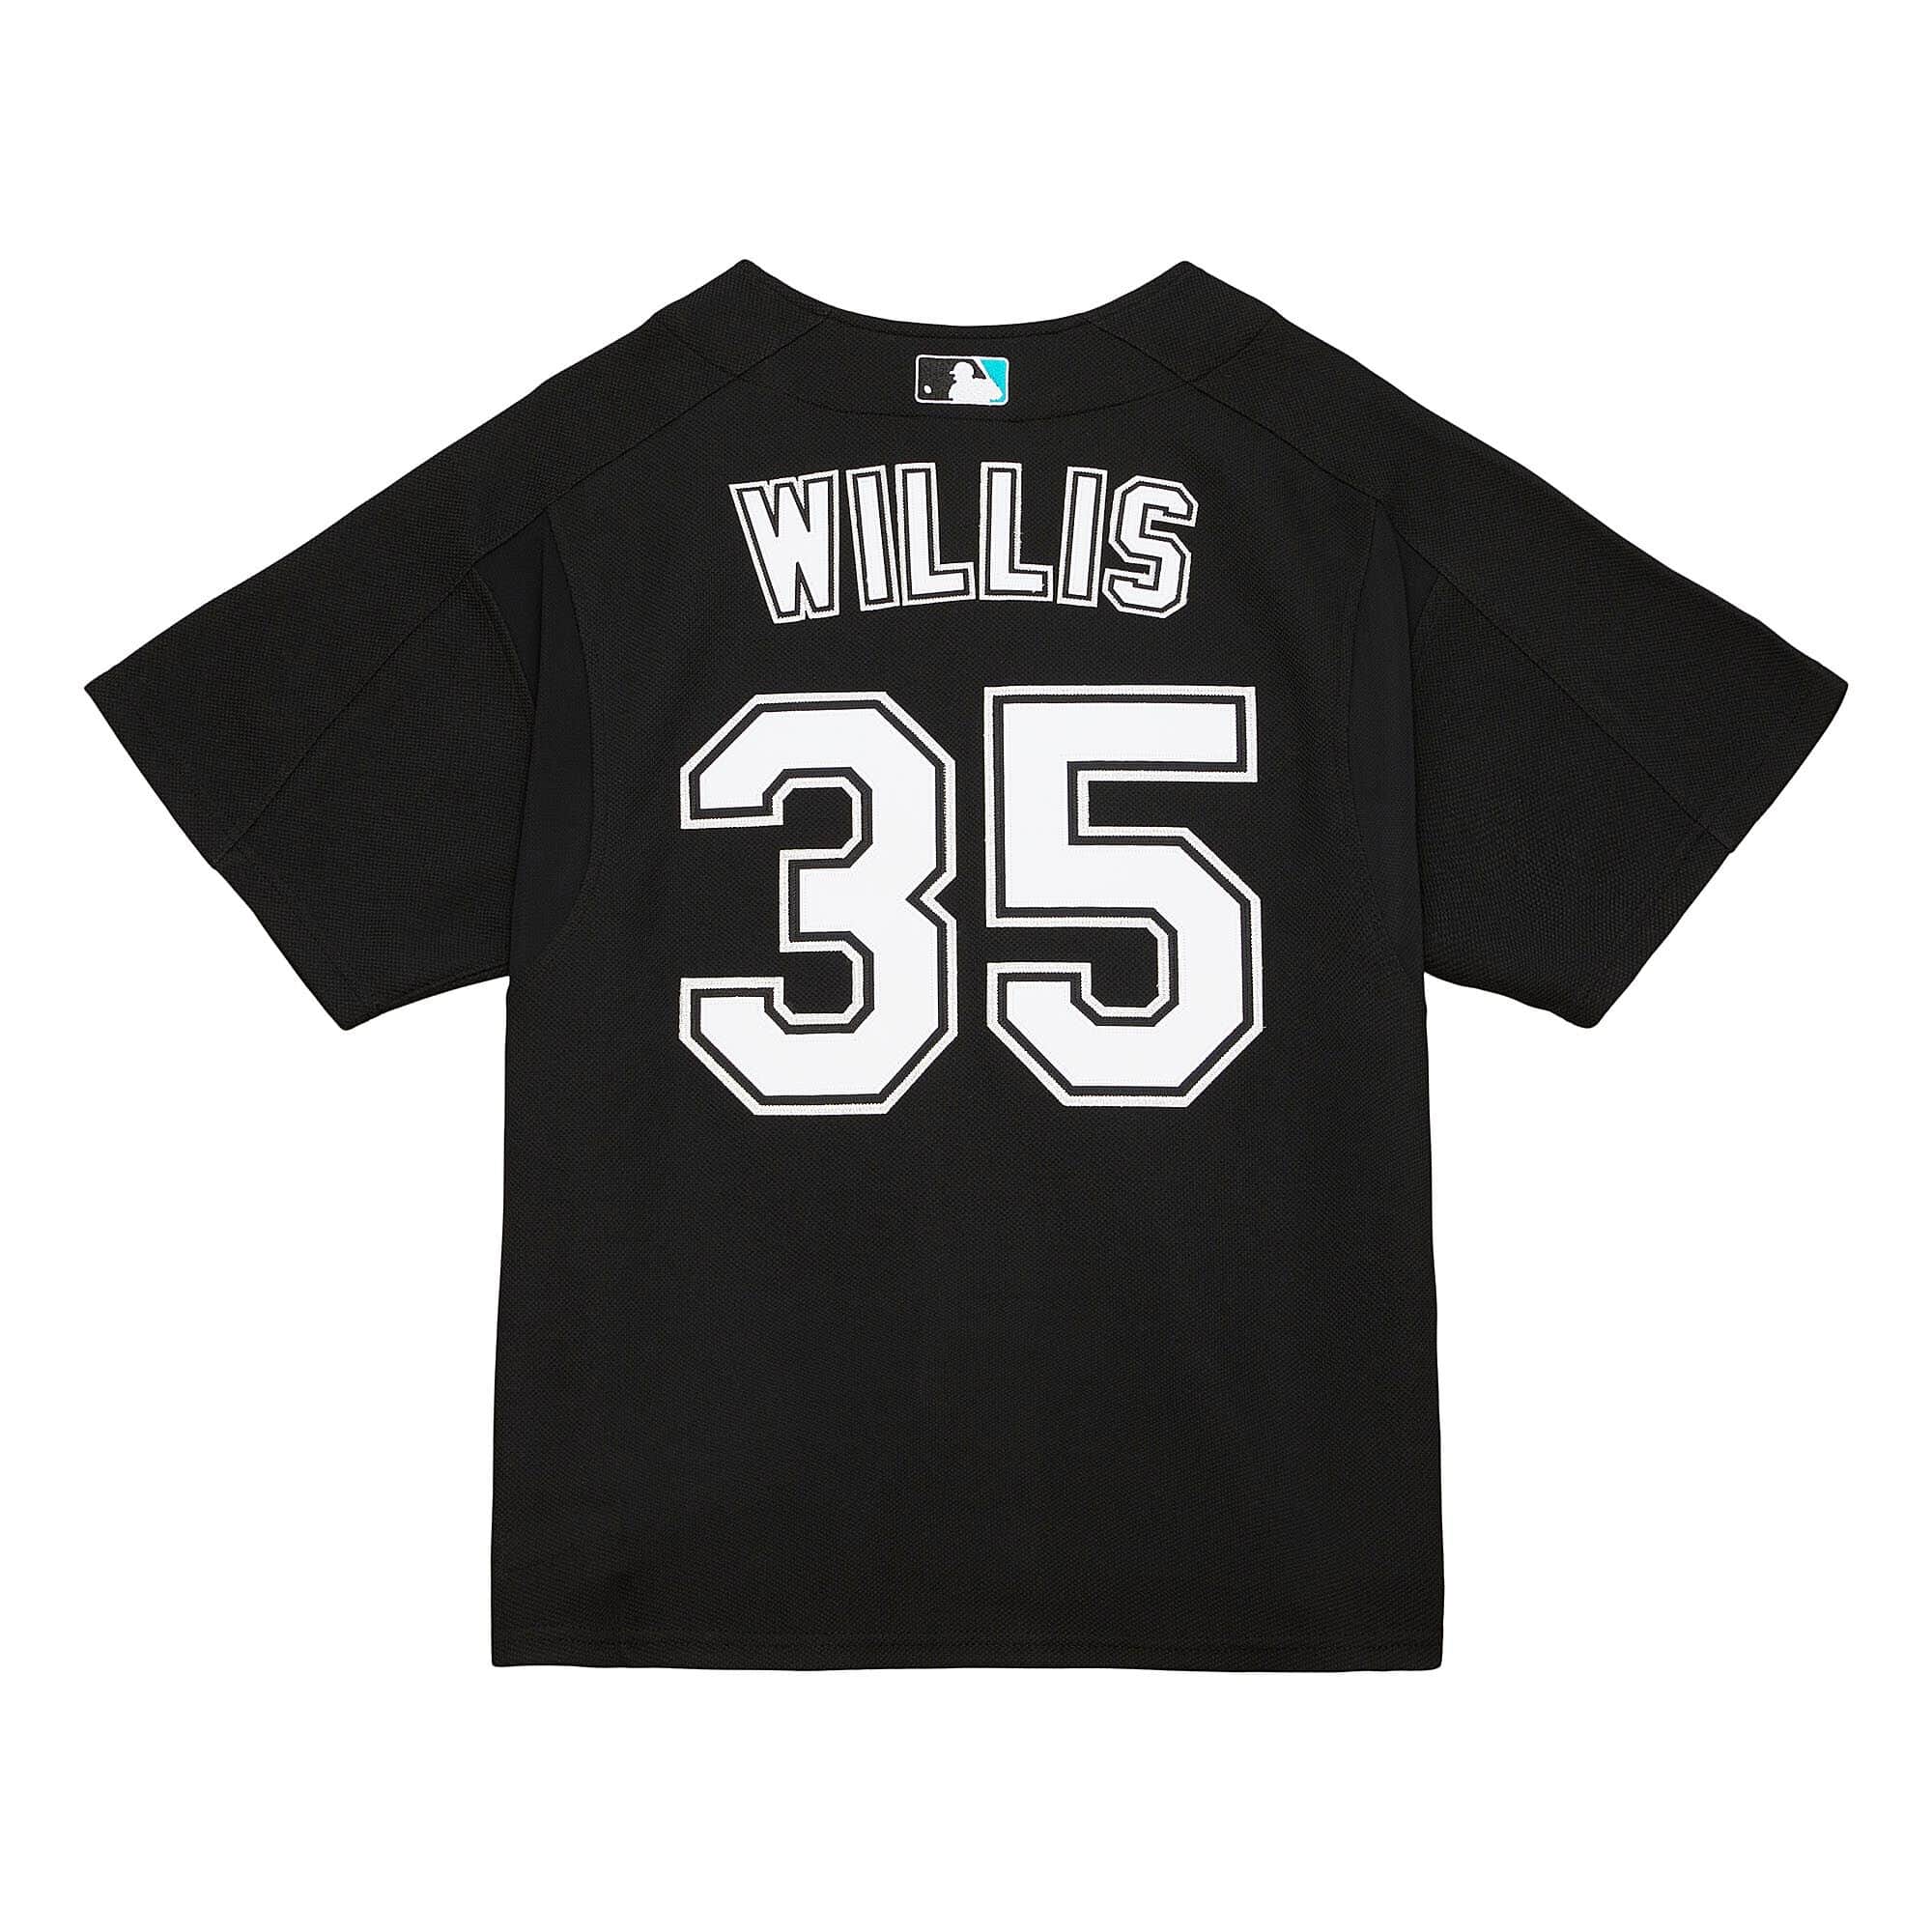 Mitchell & Ness Florida Marlins Andre Dawson Jersey for Sale in